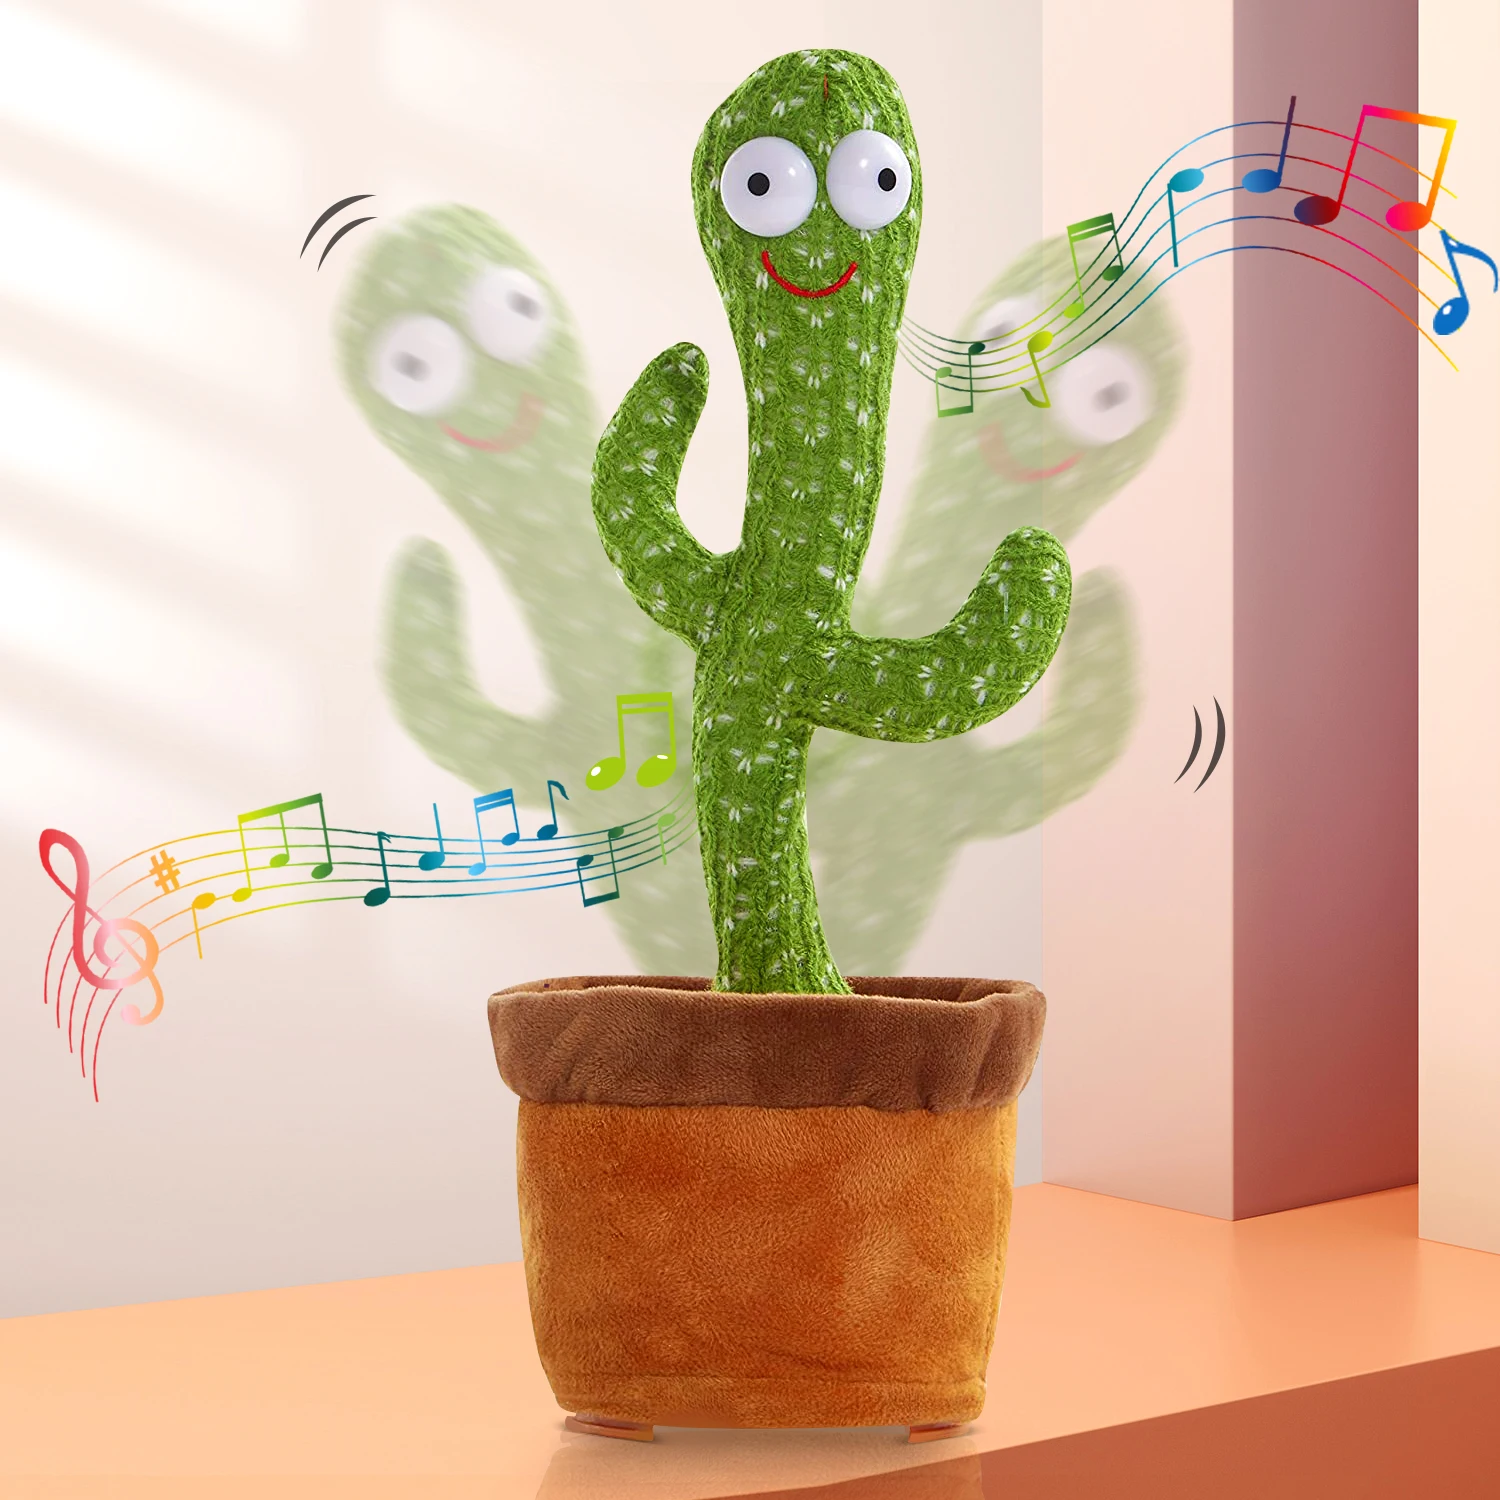 Dancing-Cactus-Repeat-Talking-Toy-Electronic-Plush-Toys-Can-Sing-Record-Lighten-USB-Early-Education-Funny.jpg_